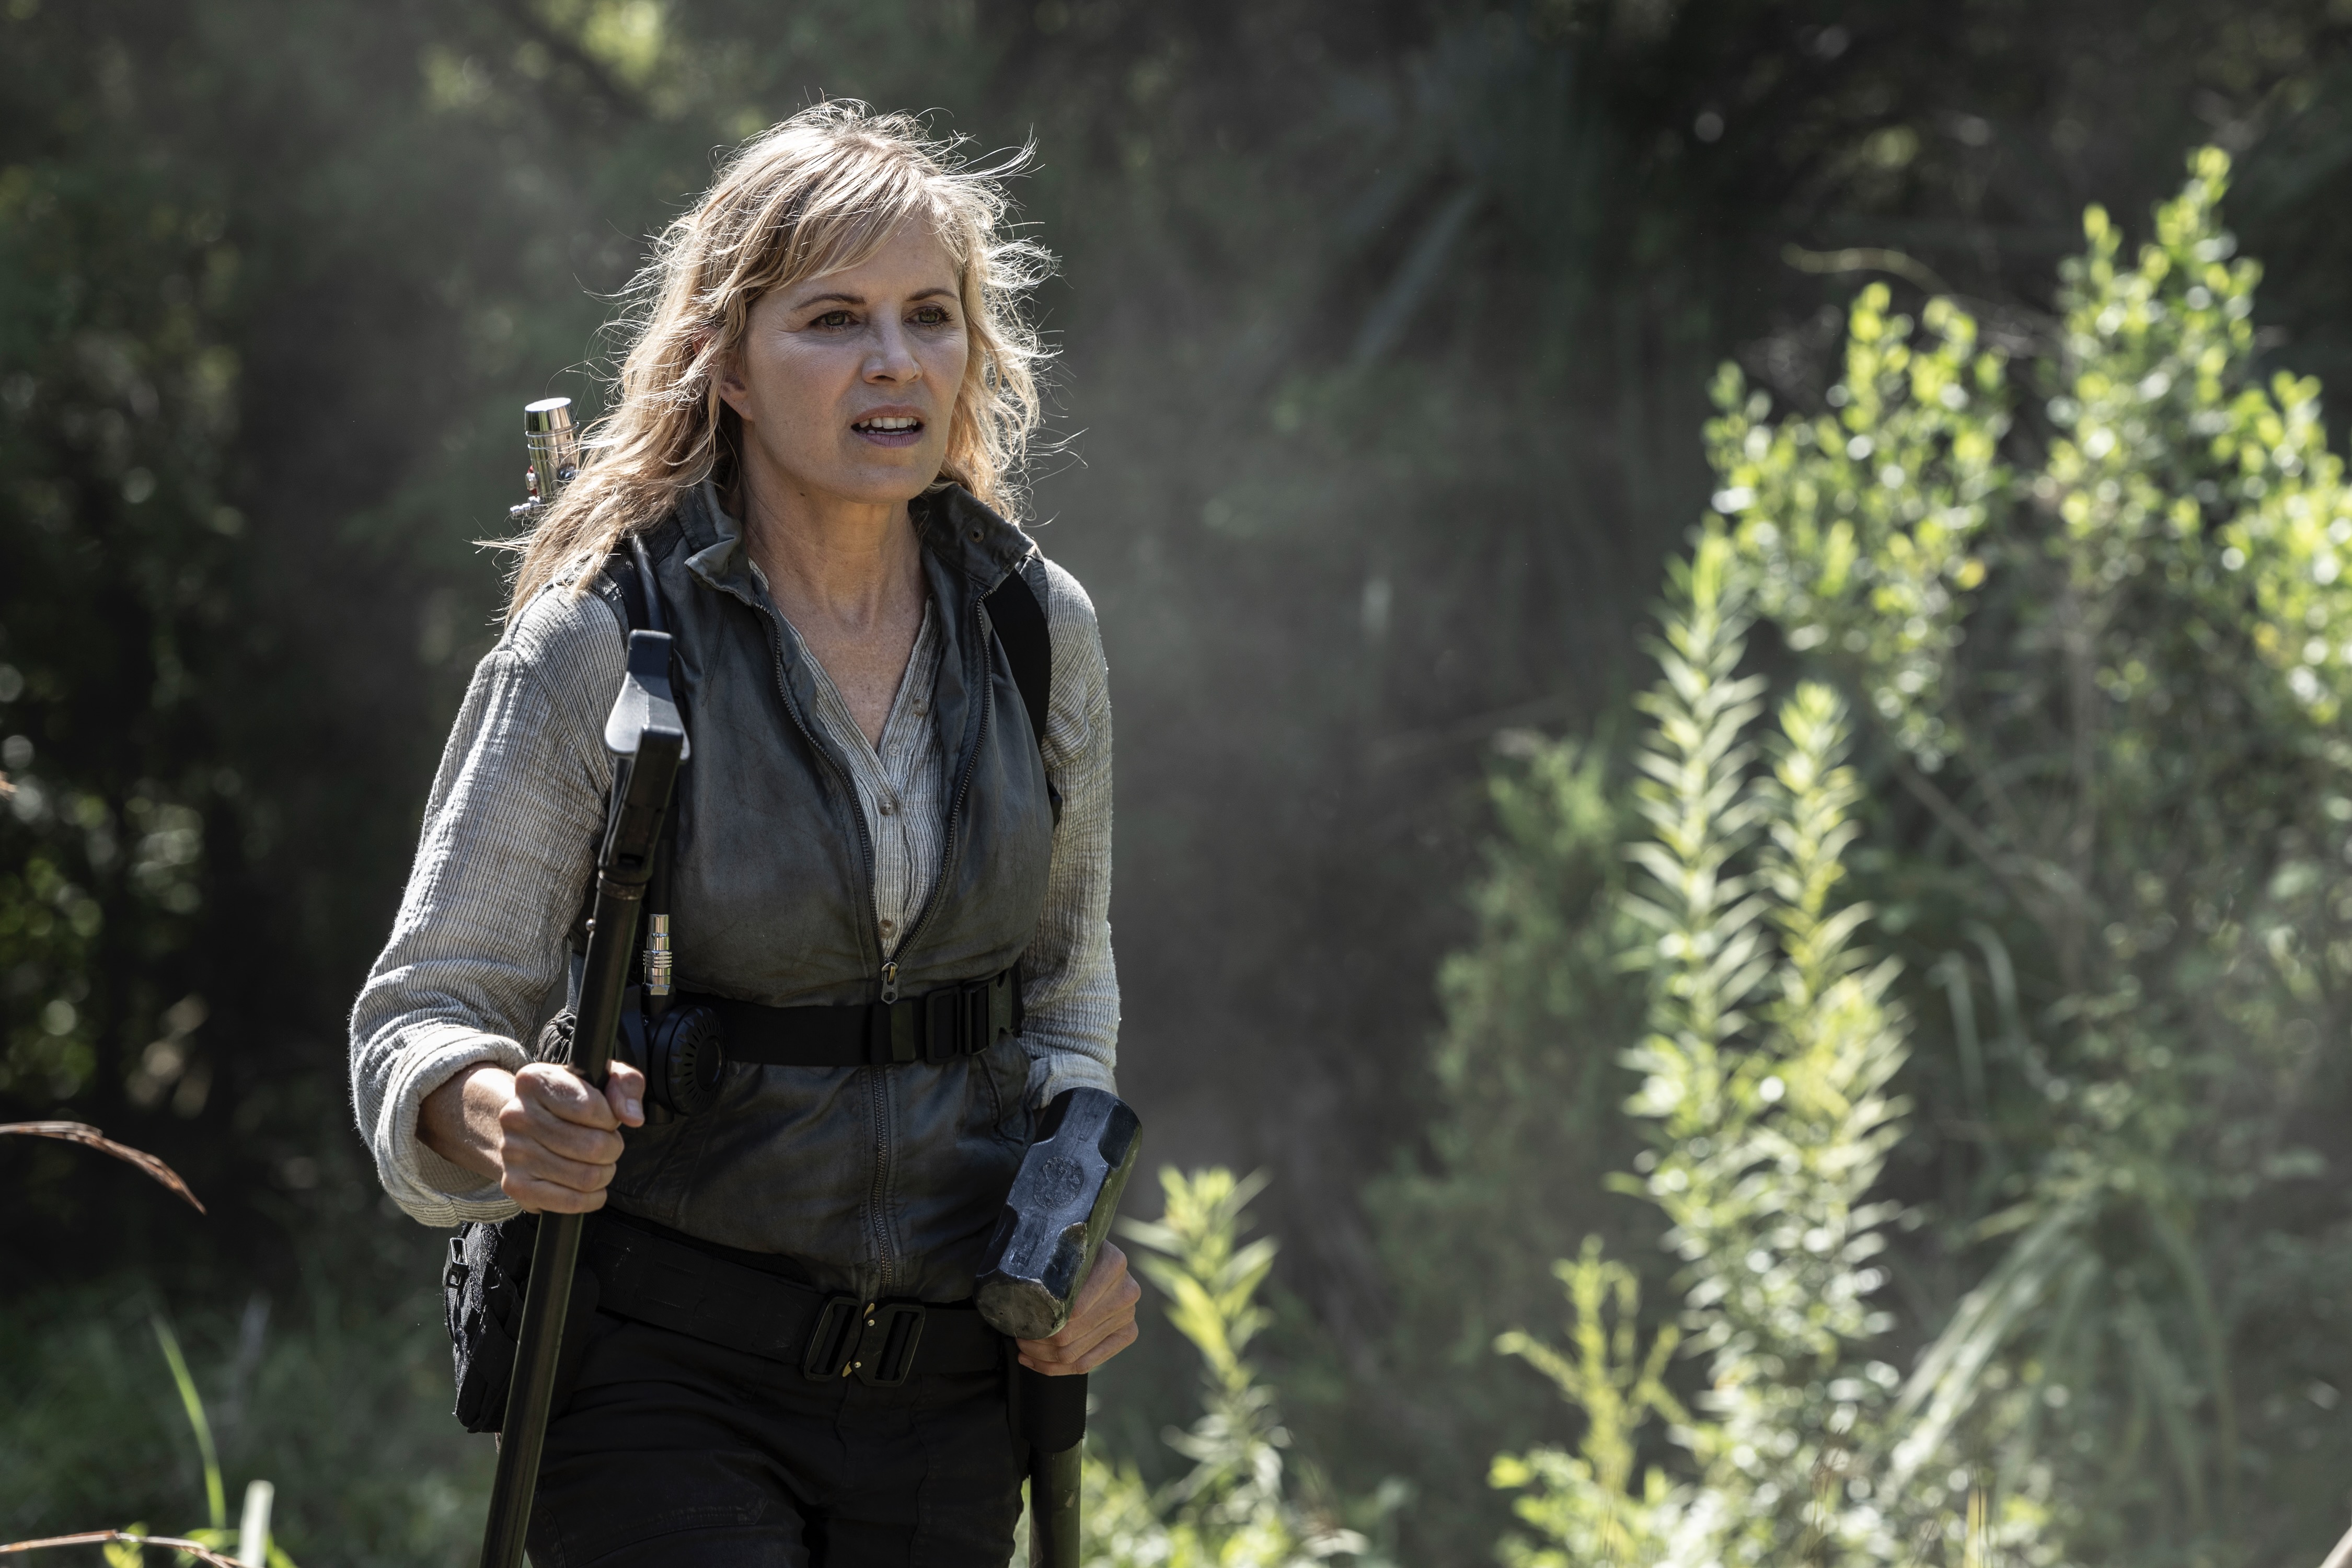 suge paraply Forbandet Fear the Walking Dead' Season 8 Premiere free live stream: How to watch  online without cable - nj.com